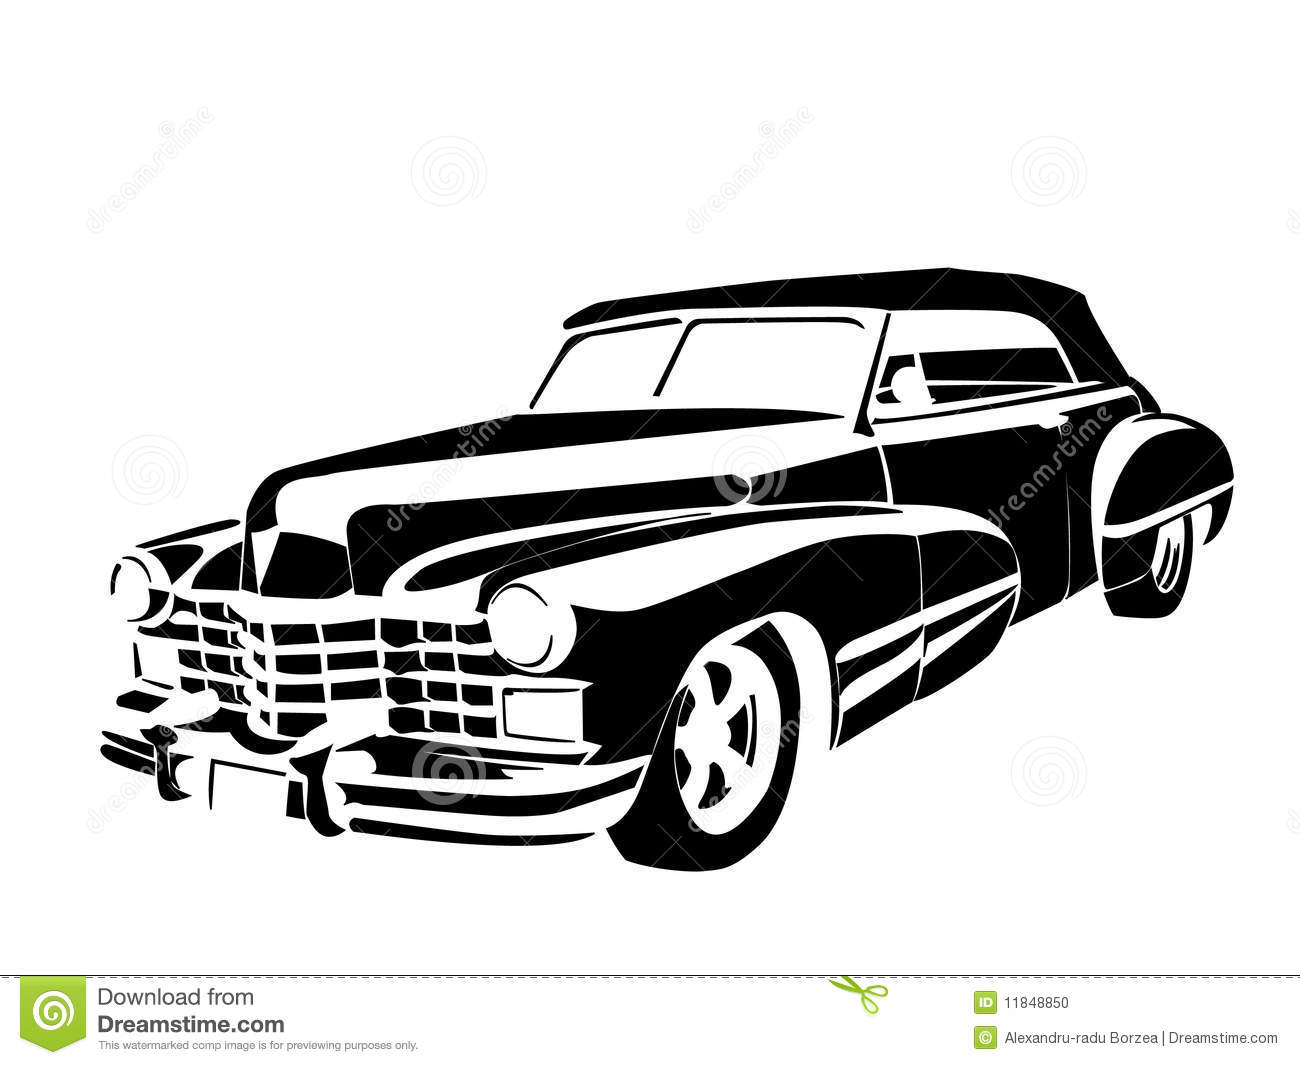 cars clipart old time